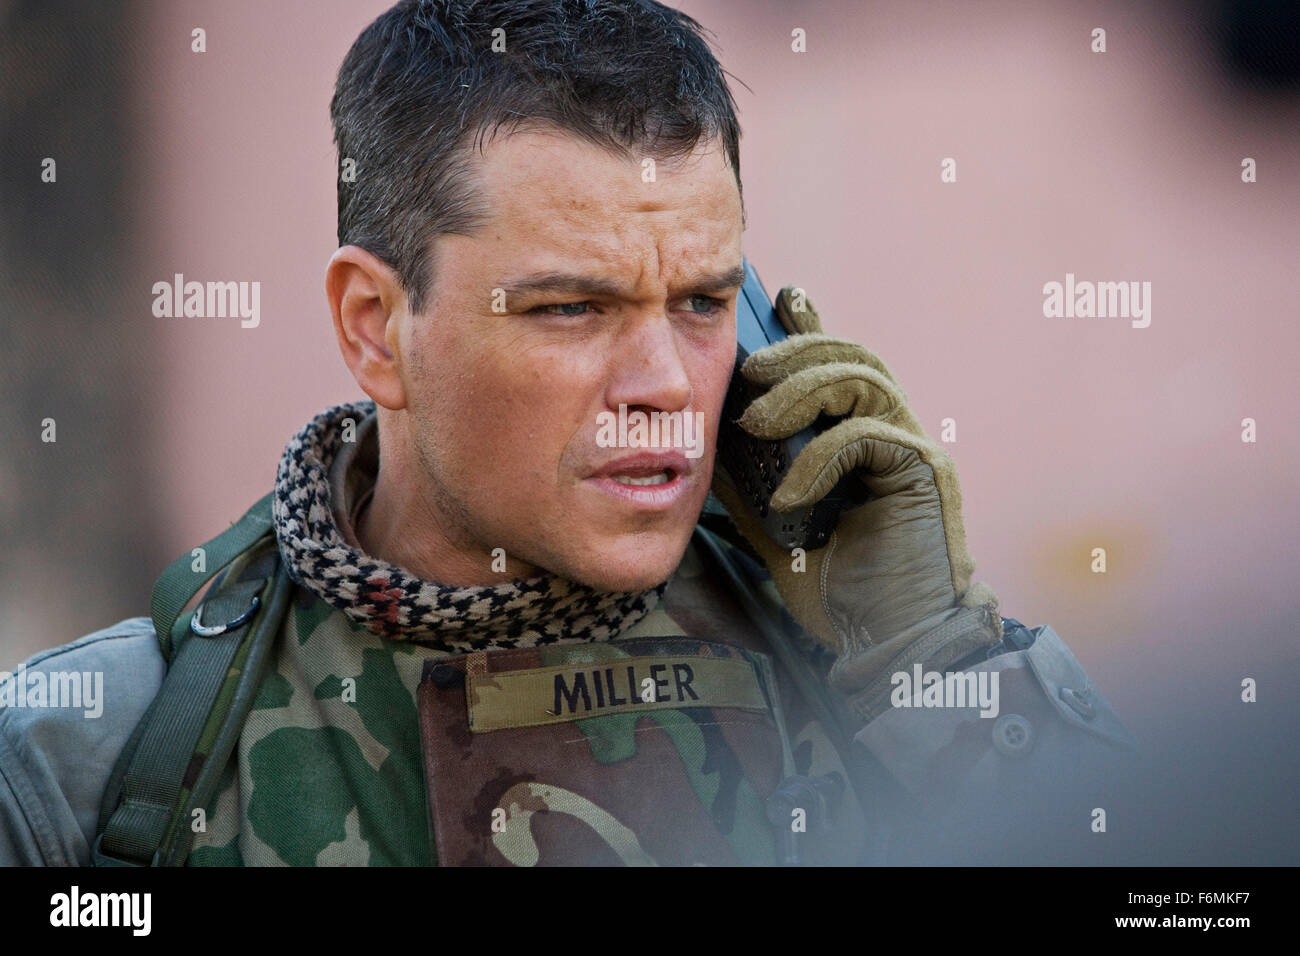 RELEASE DATE: March 12, 2010   MOVIE TITLE: Green Zone   STUDIO: Universal Pictures   DIRECTOR: Paul Greengrass   PLOT: Discovering covert and faulty intelligence causes a U.S. Army officer to go rogue as he hunts for Weapons of Mass Destruction in an unstable region   PICTURED: MATT DAMON as Chief Warrant Officer Roy Miller   (Credit Image: c Universal Pictures/Entertainment Pictures) Stock Photo